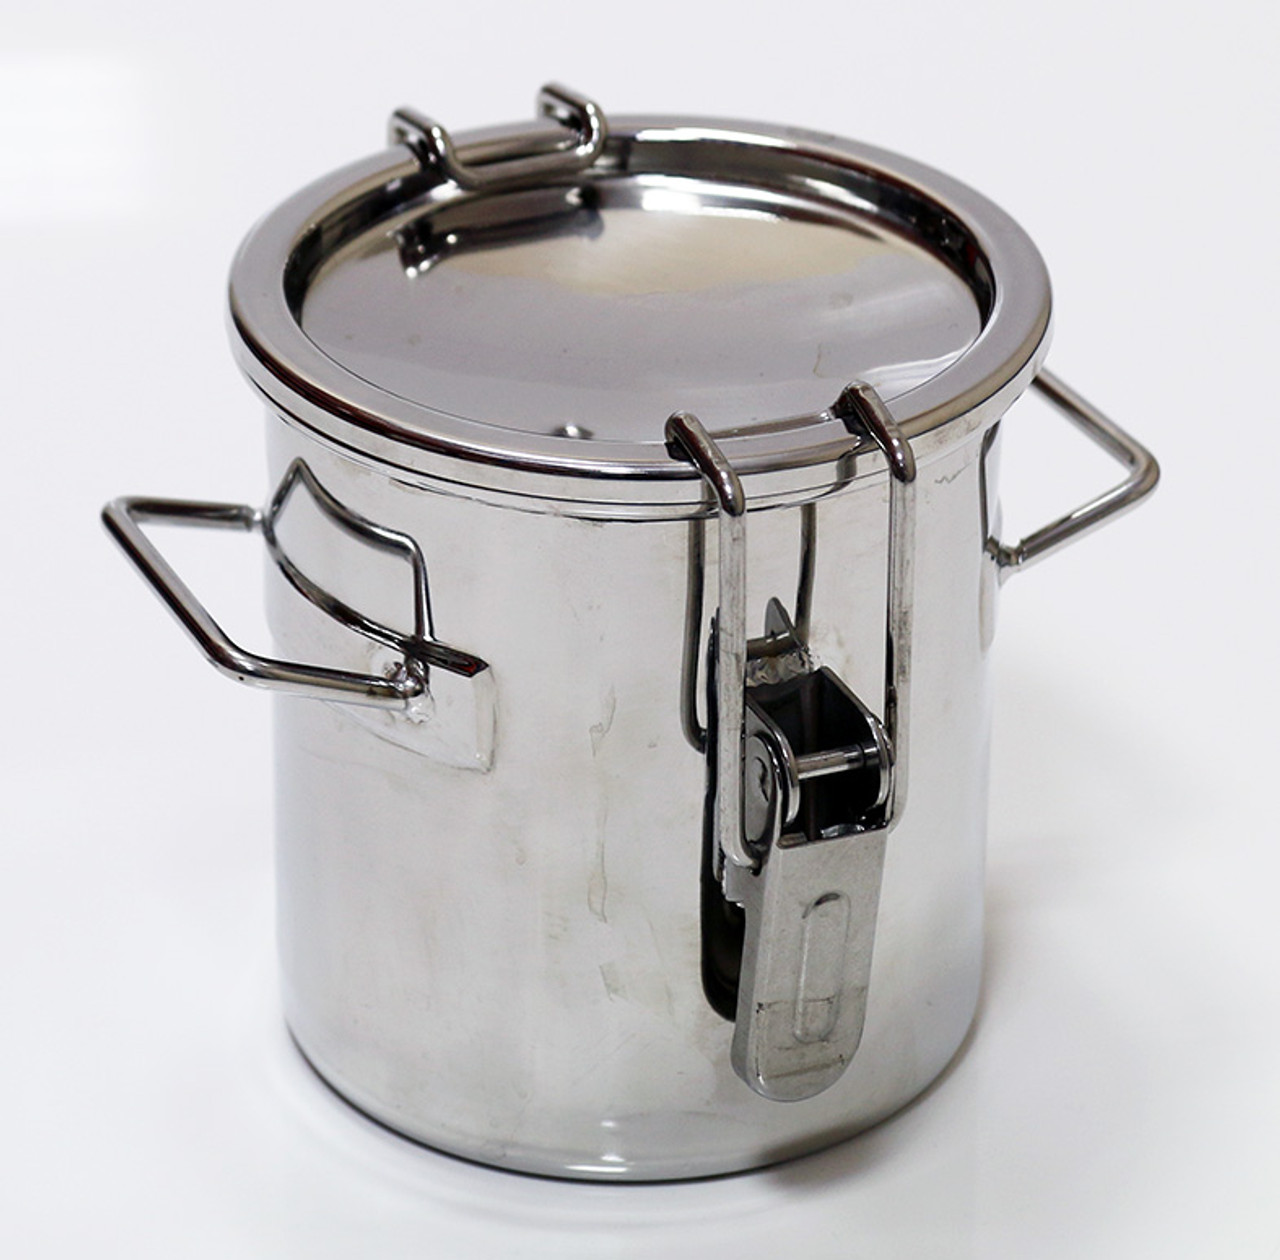 Open top pharmaceutical grade drums with lids
316L stainless steel body and lid. 
Supplied with lid, clamp and O ring
O ring is FDA and USP class VI compliant
Hygienic design
Supplied with side handles
Fully welded GMP correct construction